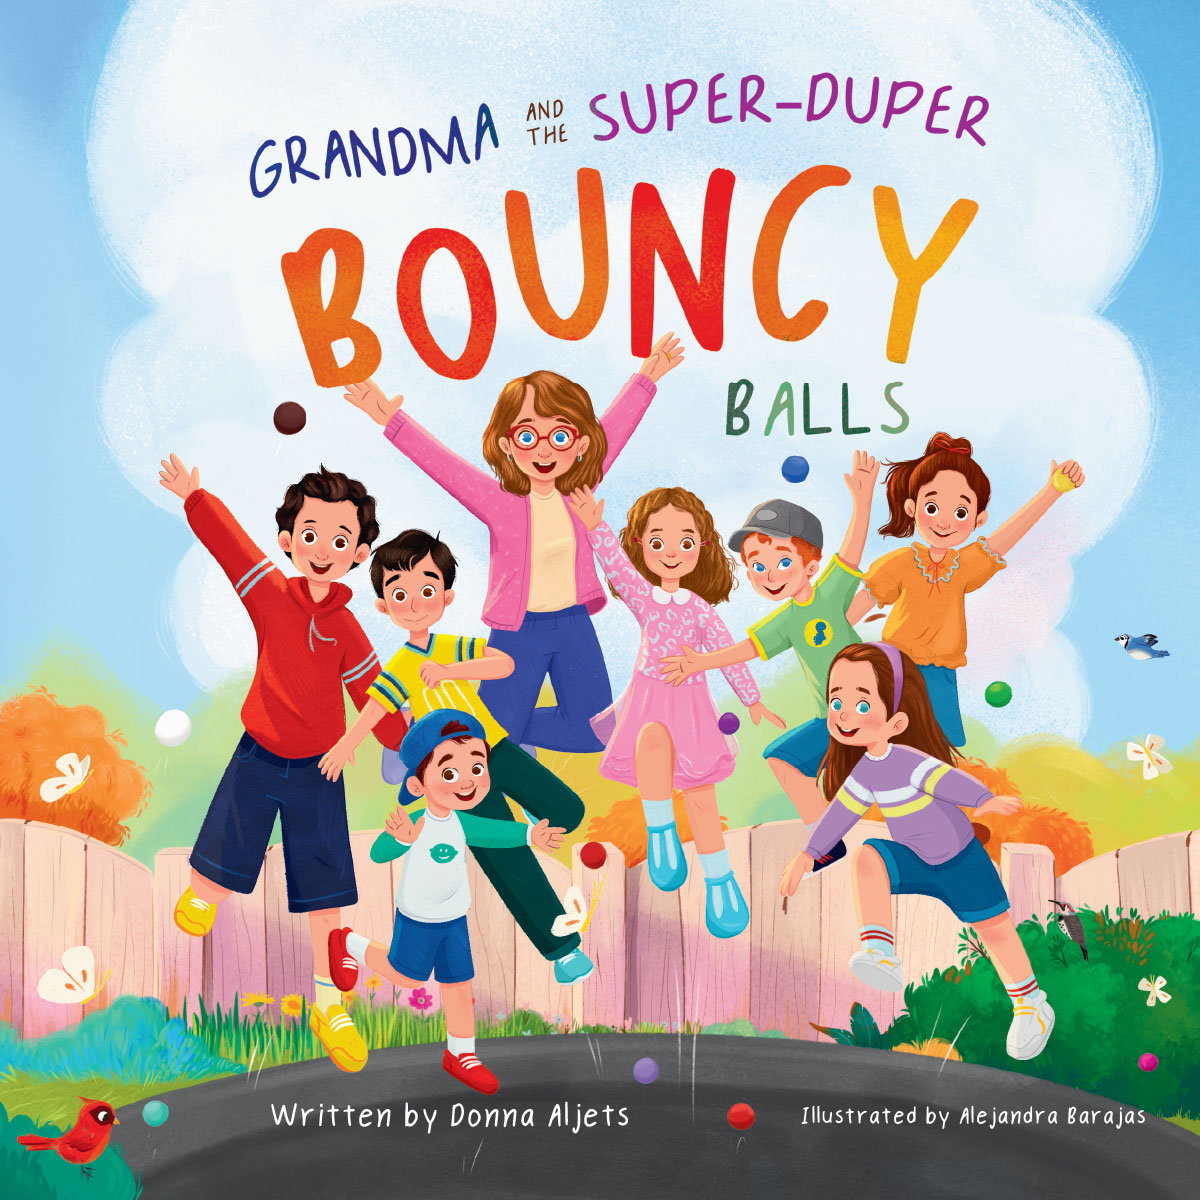 Grandma and the Super-Duper Bouncy Balls by Donna Aljets Book Cover